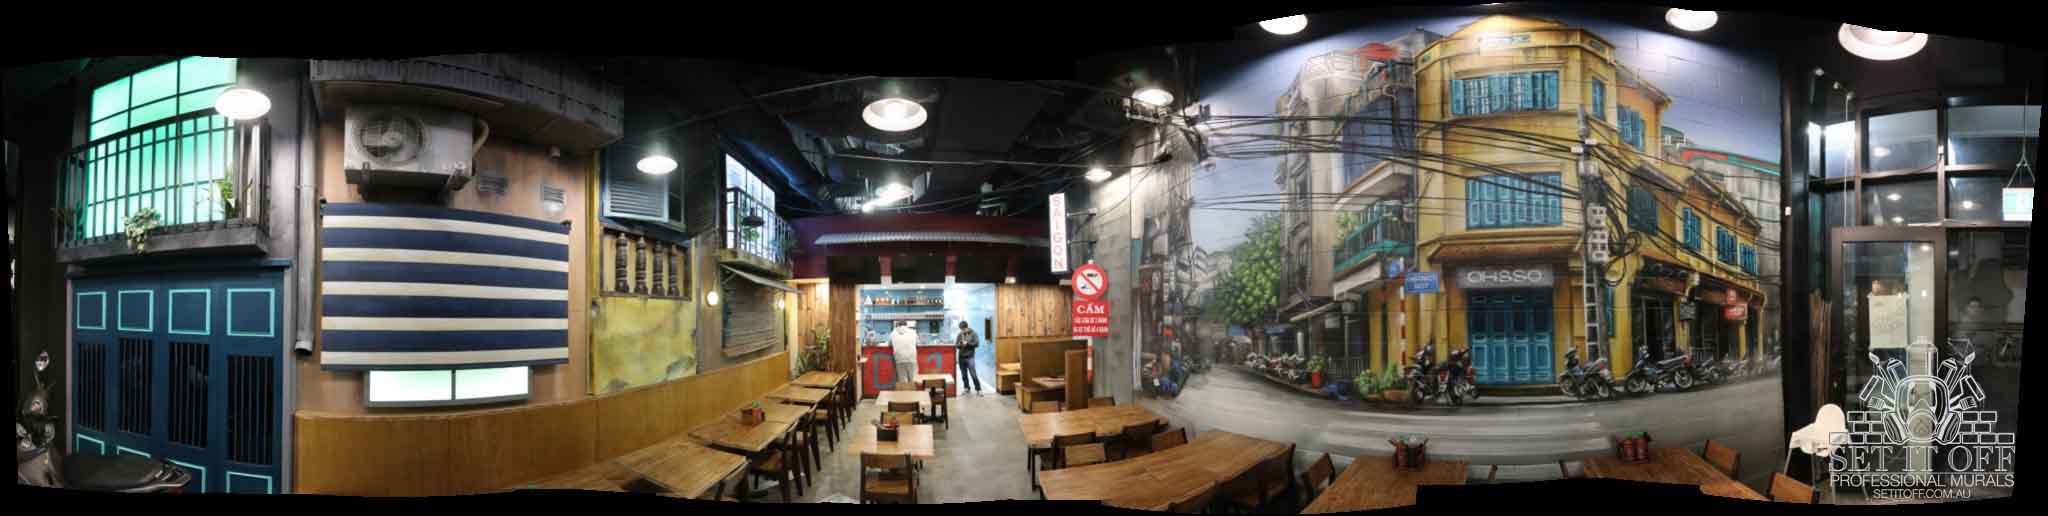 Continuous wall murals throughout a Vietnamese restaurant combined with other recycled materials and sculptures.